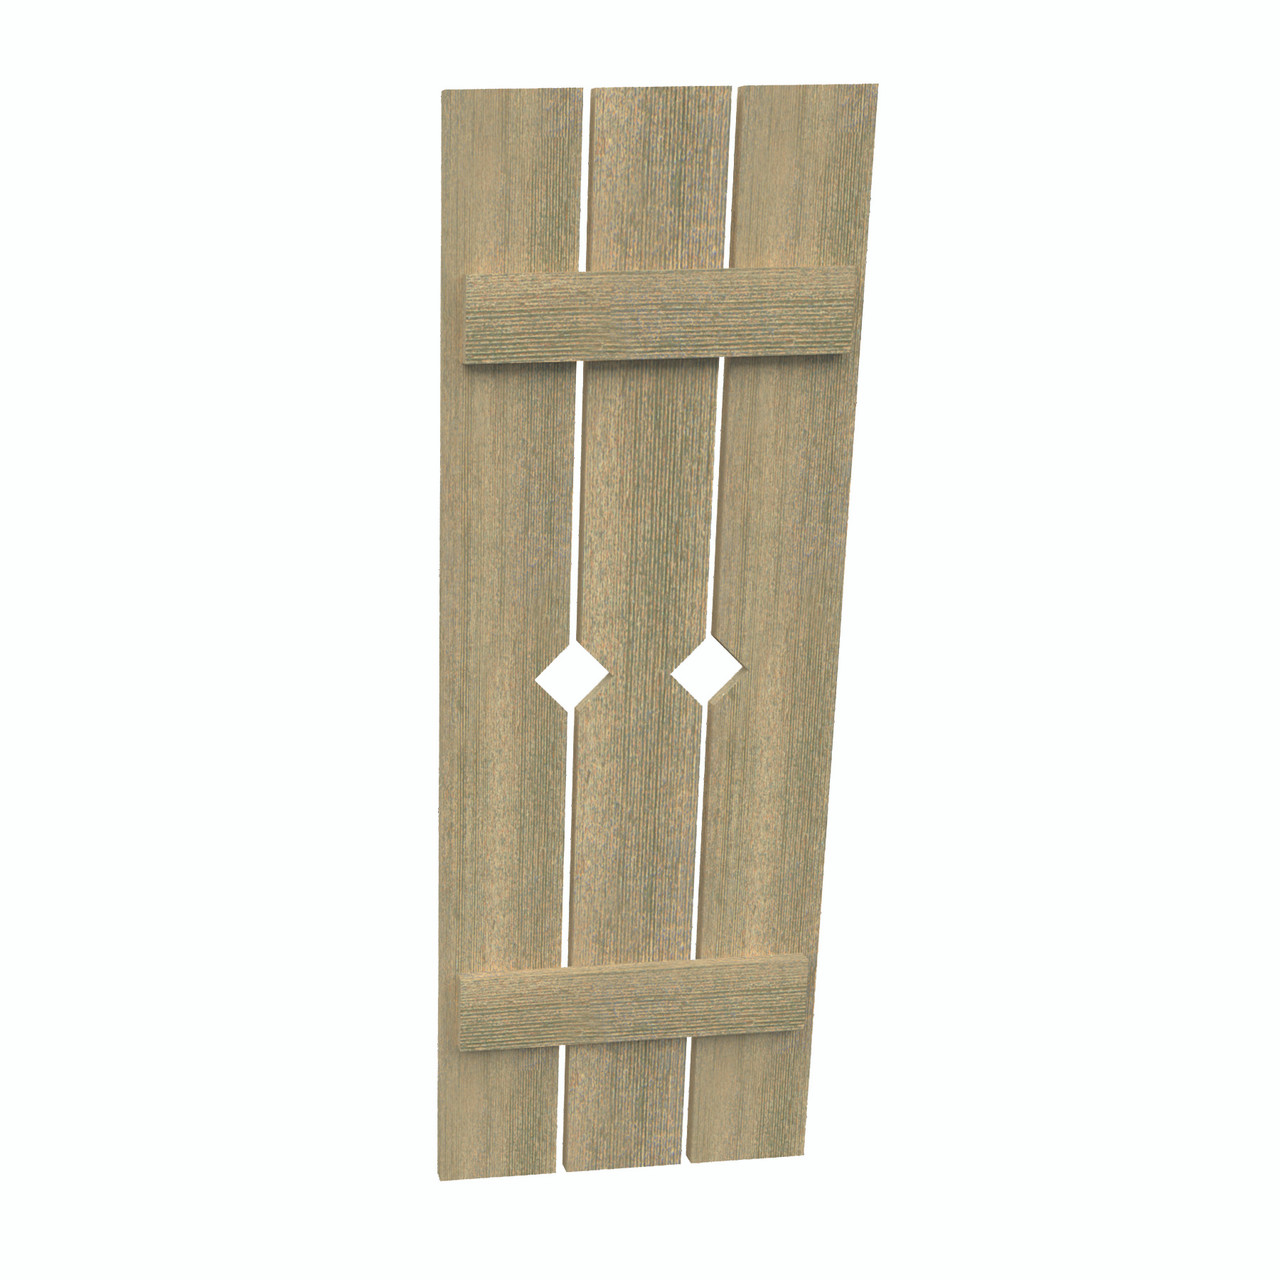 18 inch by 64 inch Plank Shutter with 3-Plank, Diamond